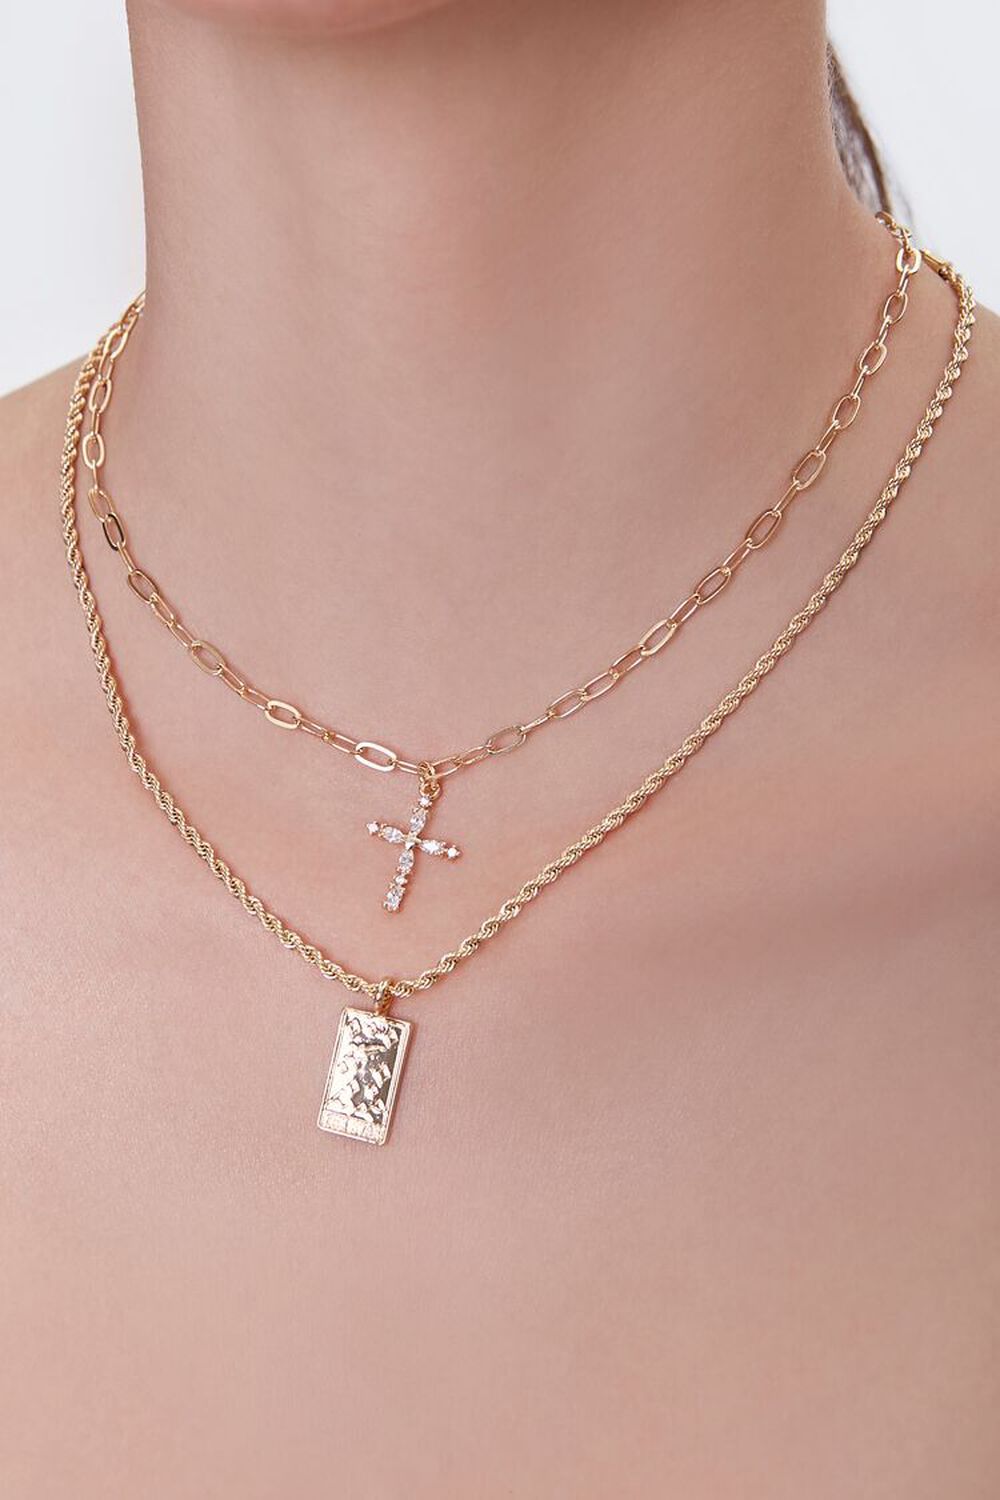 GOLD/CLEAR Rhinestone Cross Layered Necklace, image 1